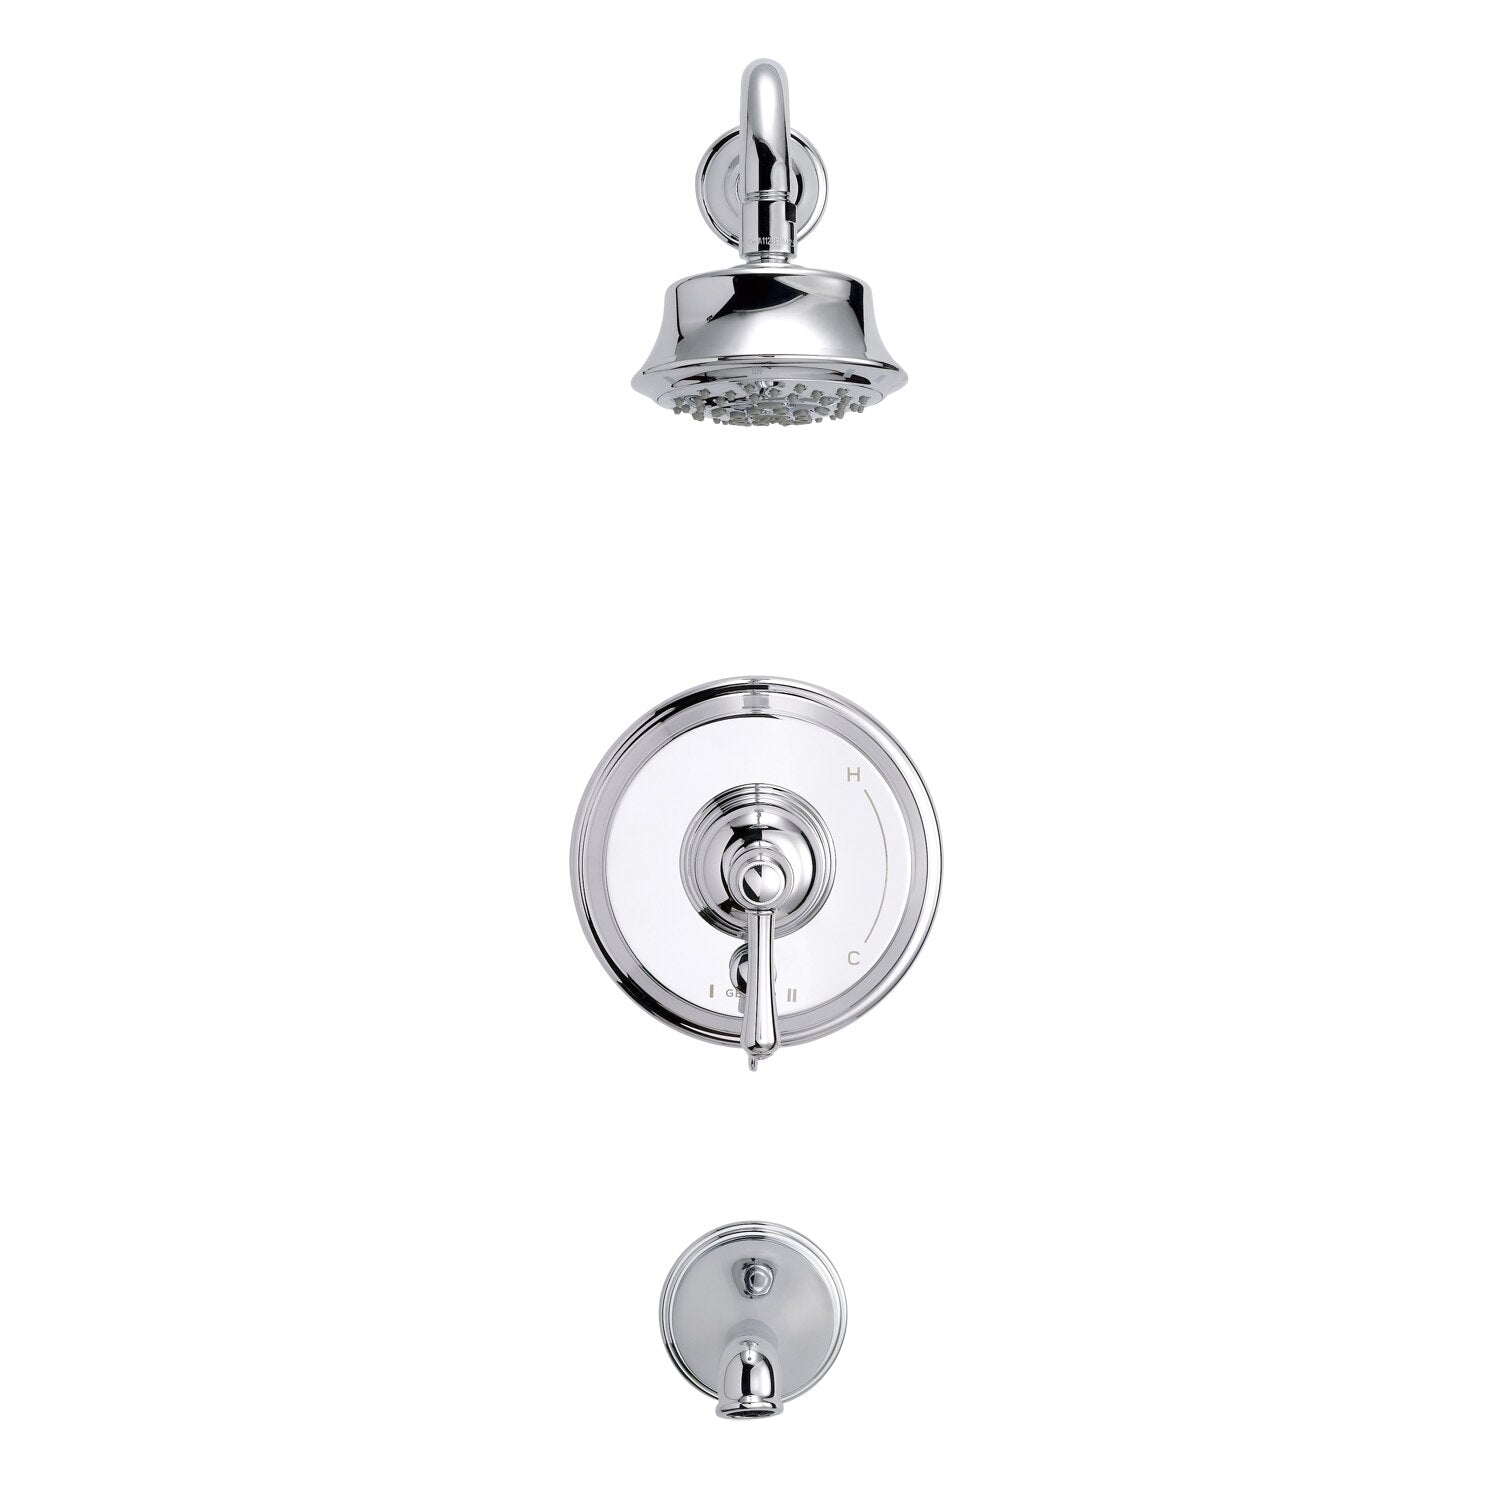 Danze by Gerber Opulence 1H Tub and Shower Trim Kit and Treysta Cartridge w/ Diverter on Valve and 5 Function Showerhead 1.75gpm